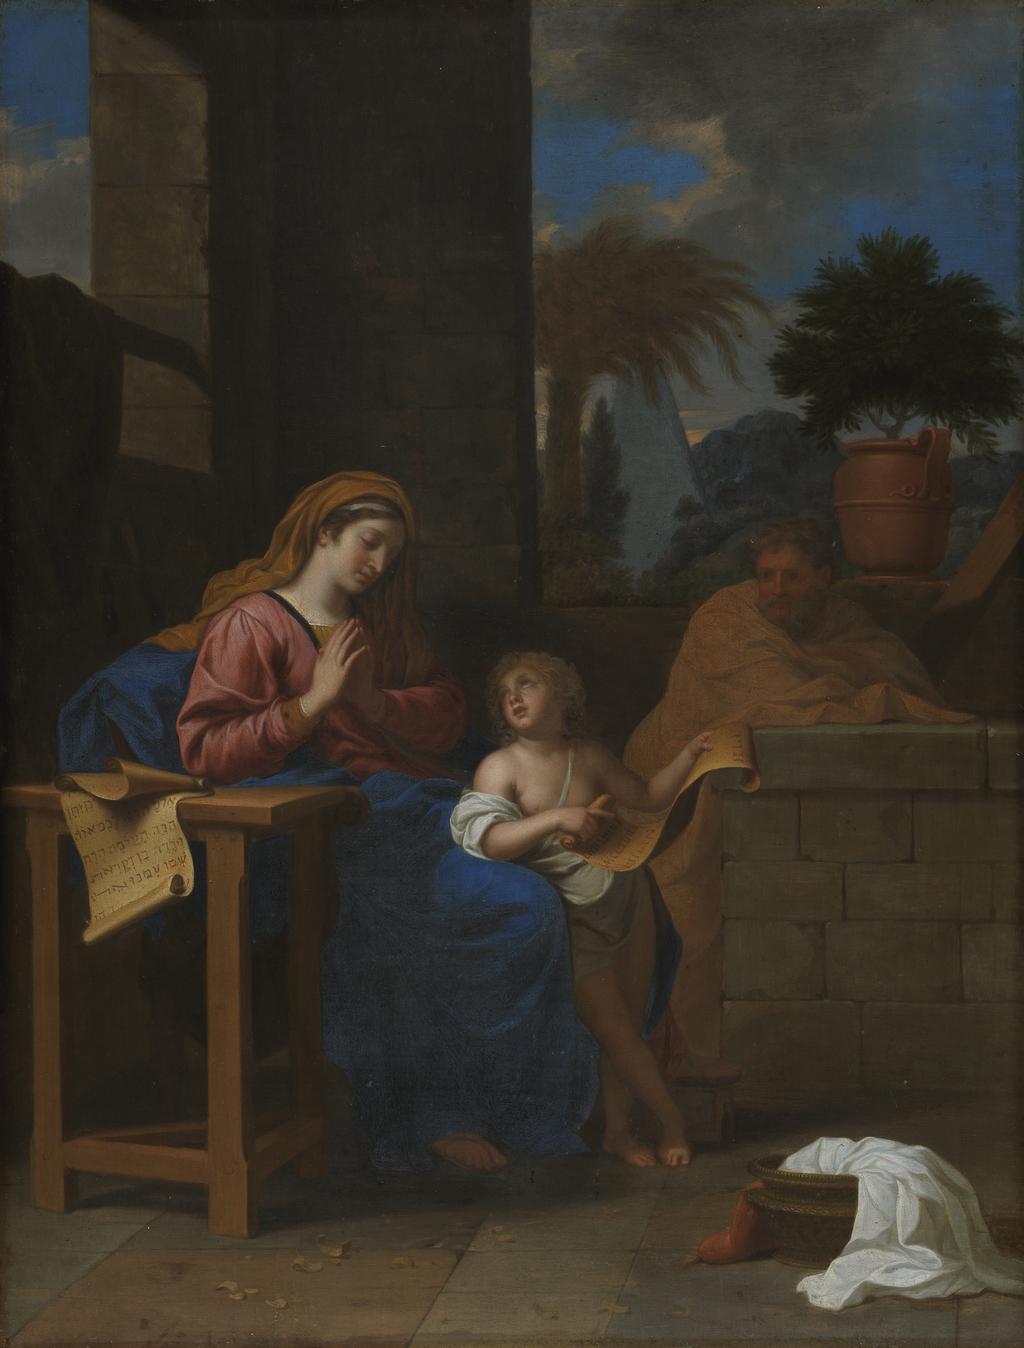 An image of The Holy Family. Le Brun, Charles (French, 1619-1690). Oil on panel, height 56.8 cm, width 43.5 cm.